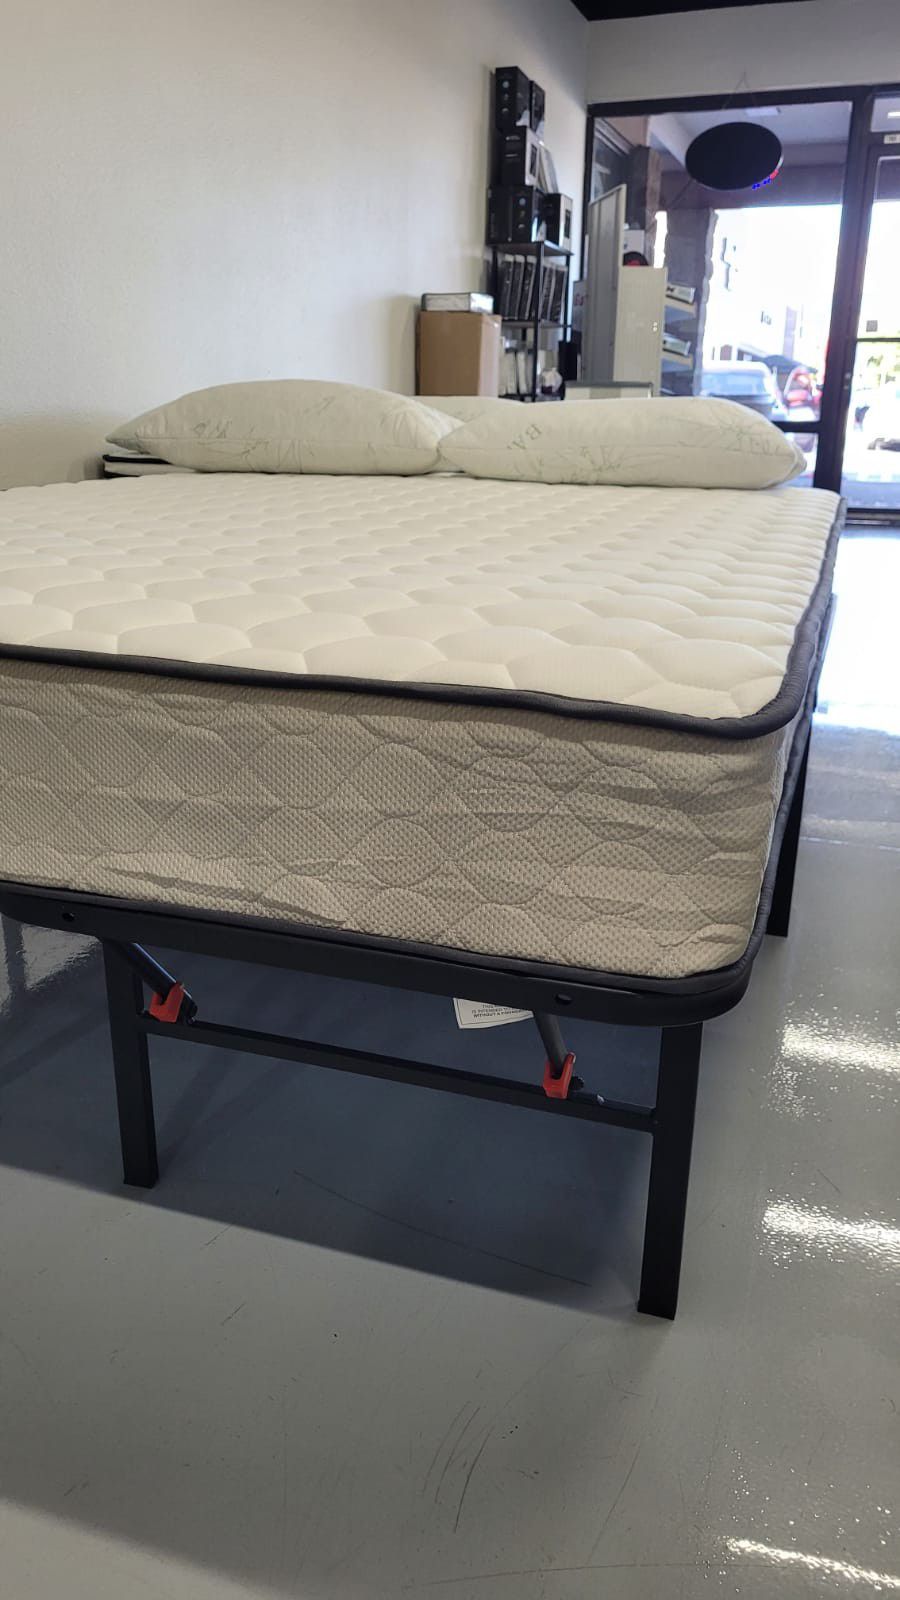 Brand New Firm Hybrid Mattress With Cooling Gel Memory Foam and Springs - Twin Full and Queen Bed In A Box 📦